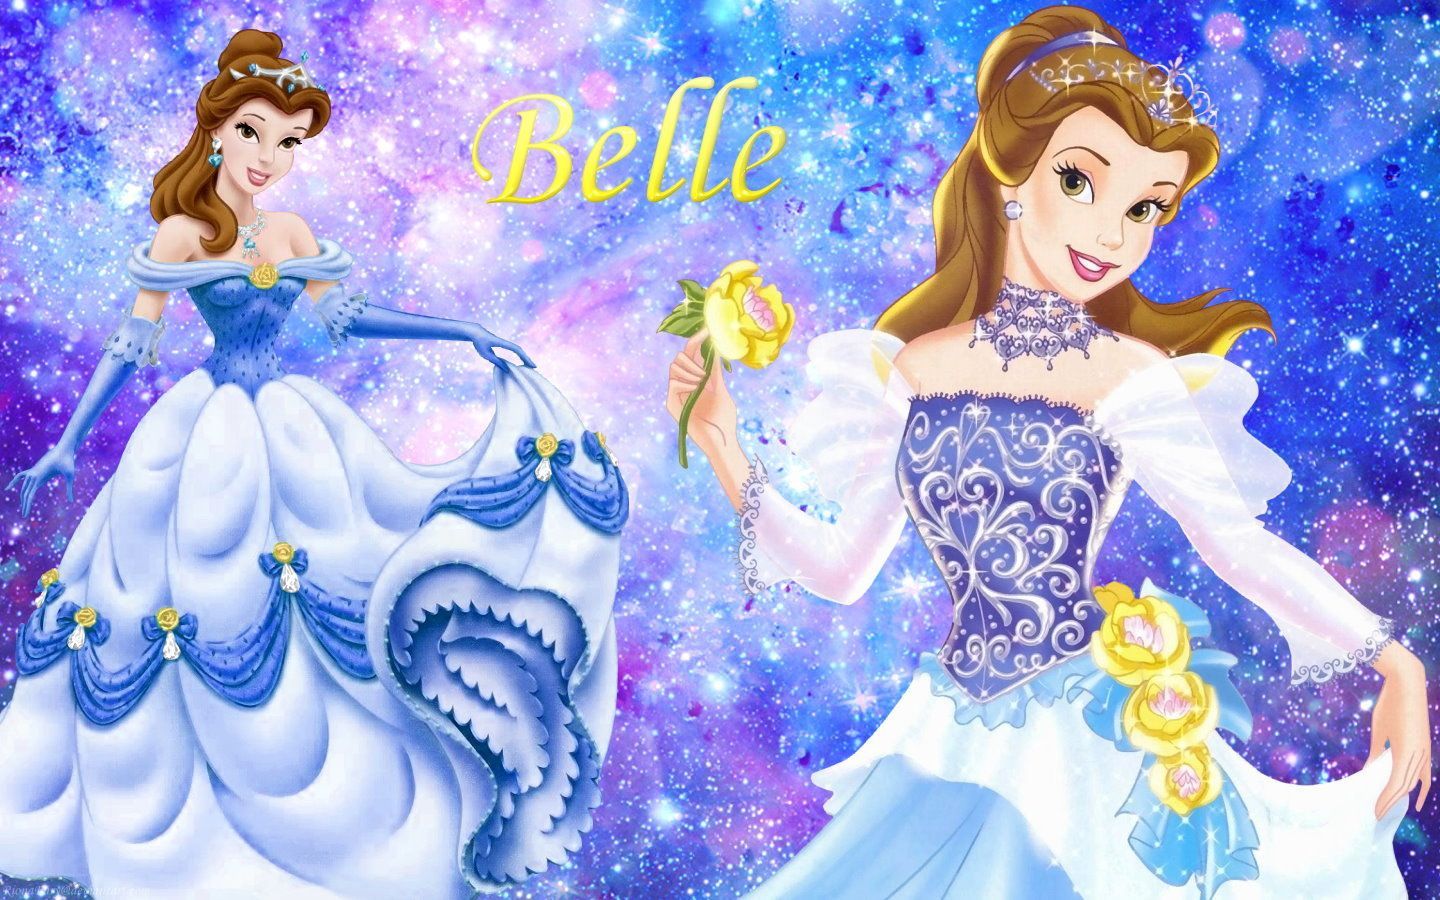 Beauty and the Beast Wallpaper: Belle. Disney princess wallpaper, Disney princess belle, Disney princesses and princes